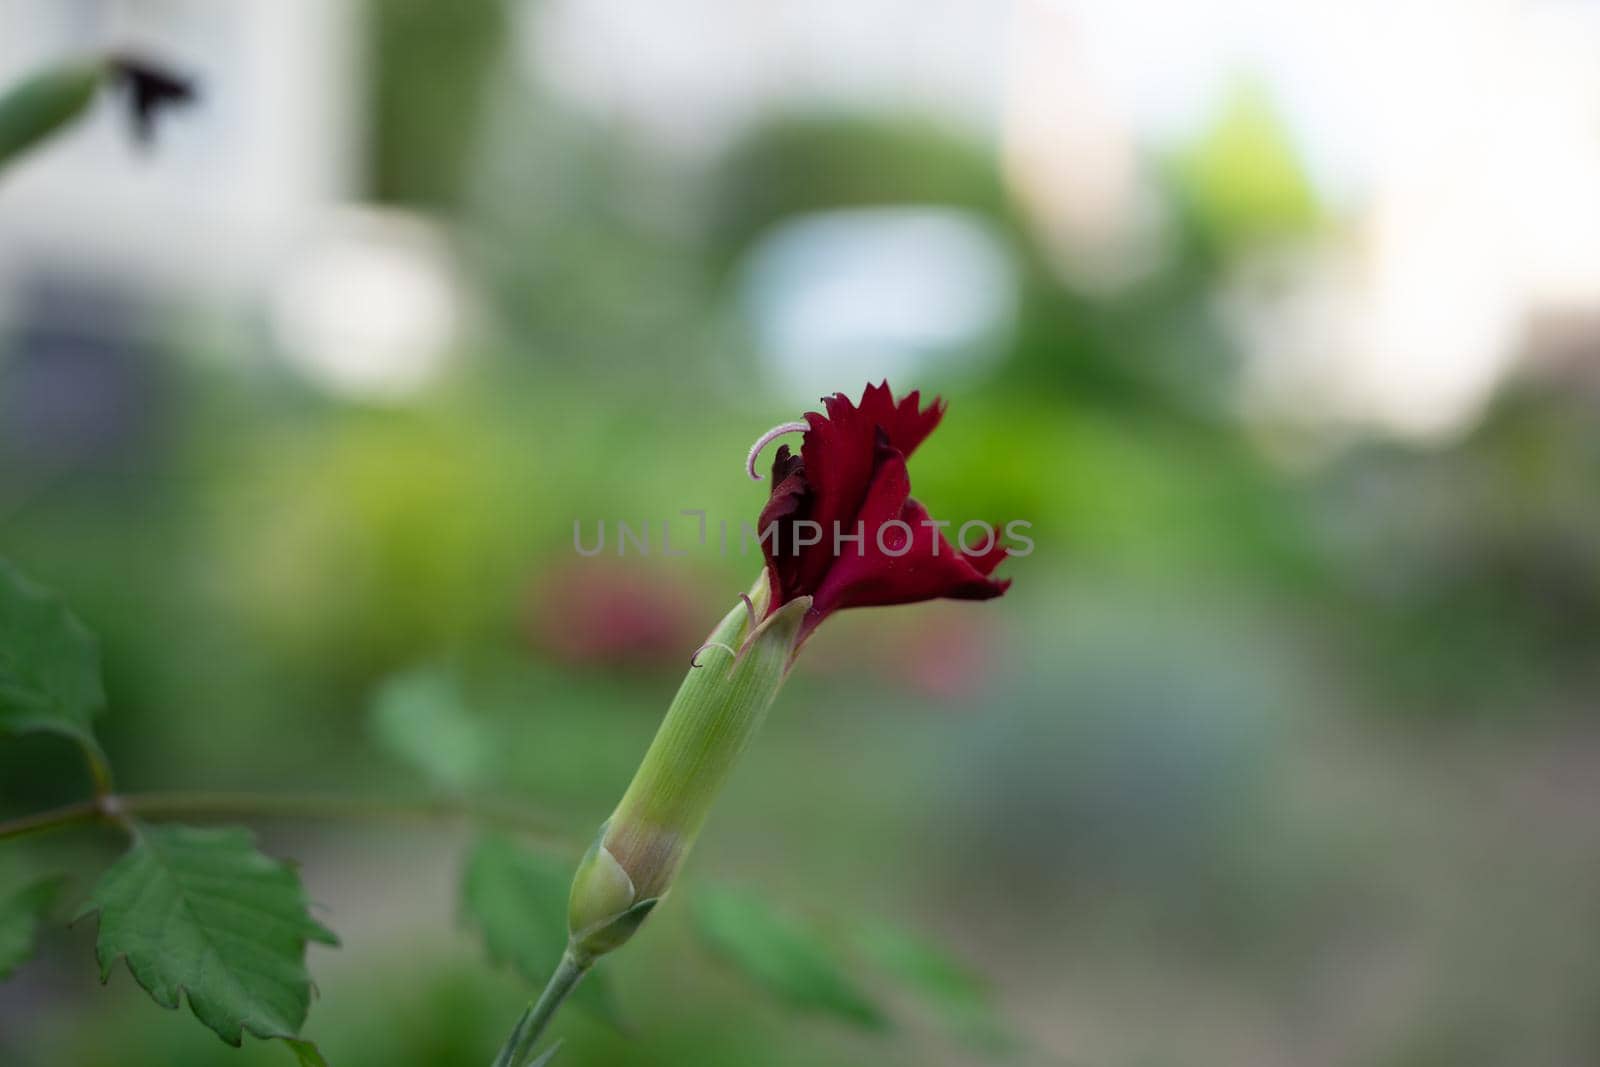 Unblown red flower bud on a beautiful blurred background. Soft focus.